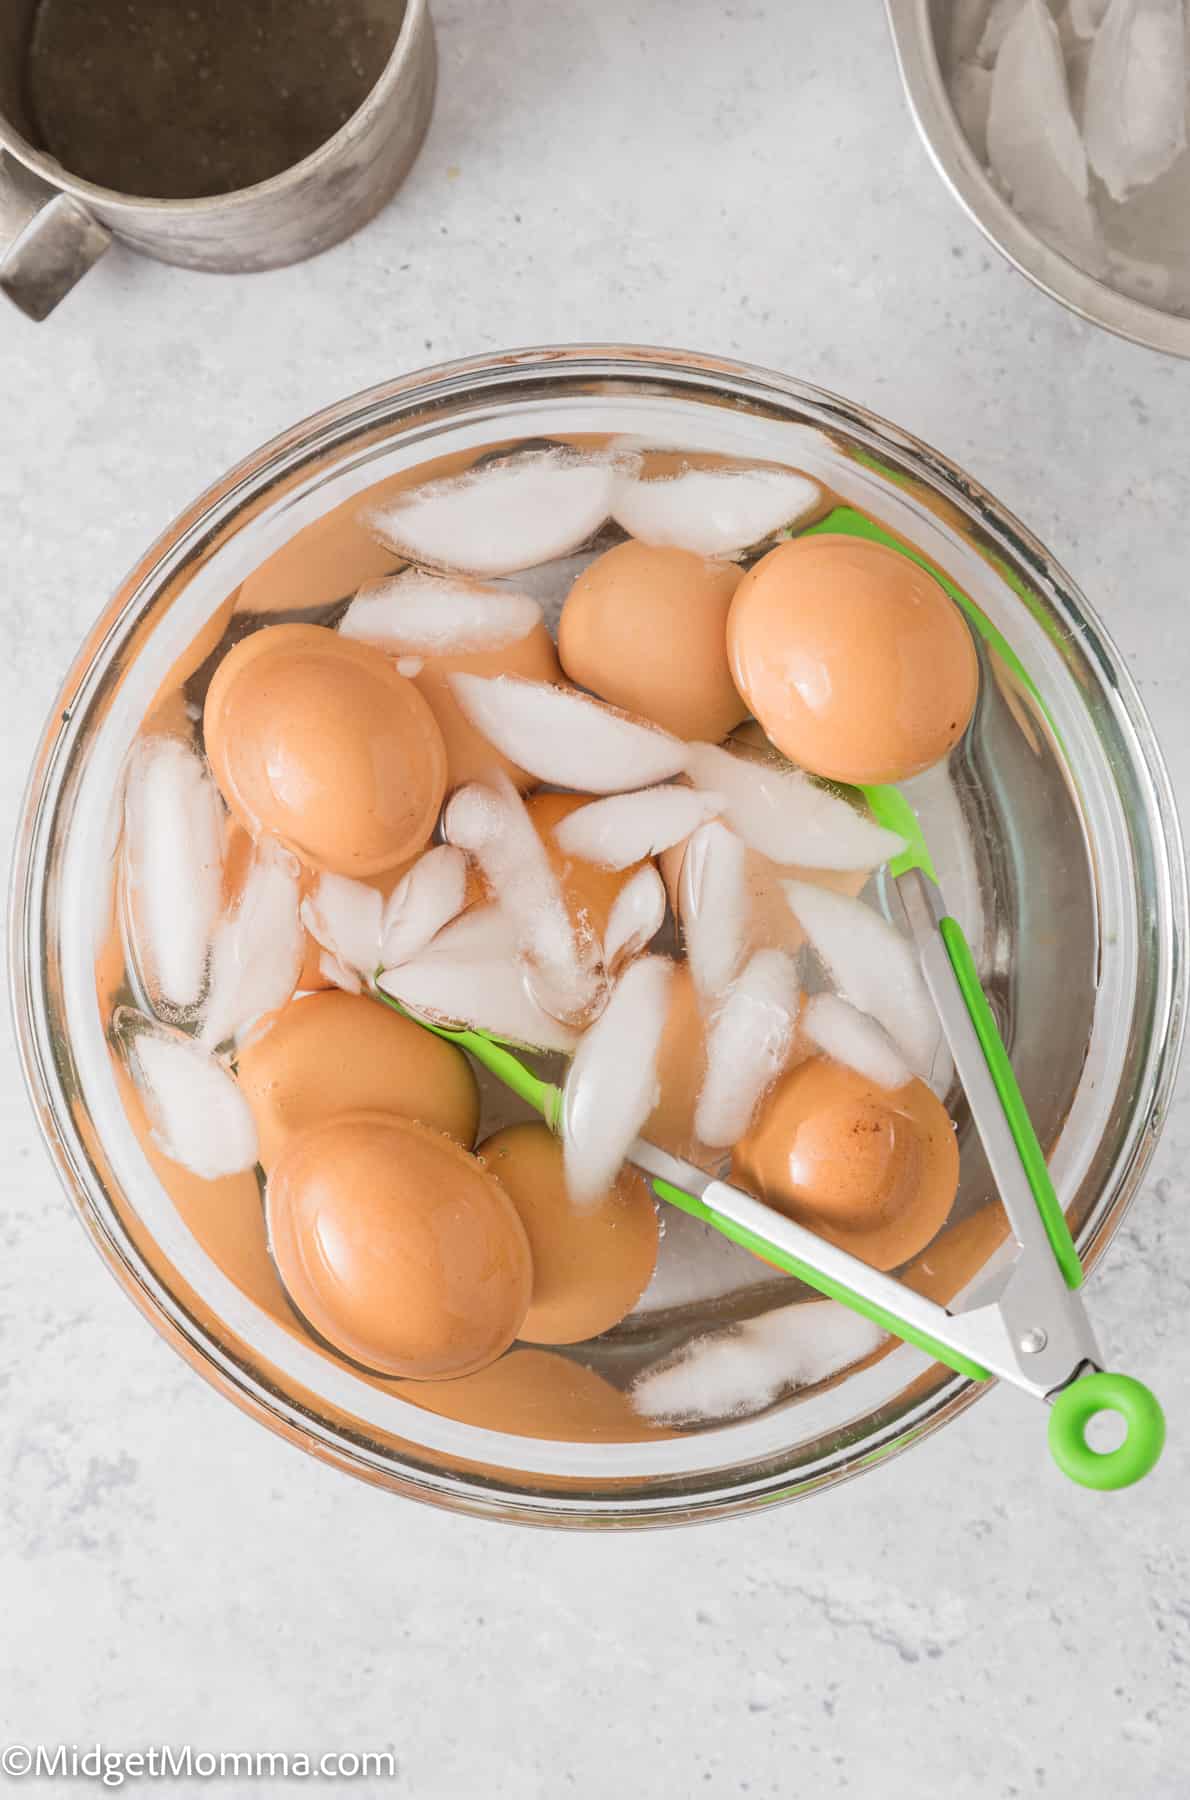 Eggs in a bowl with ice and water and green tongs.